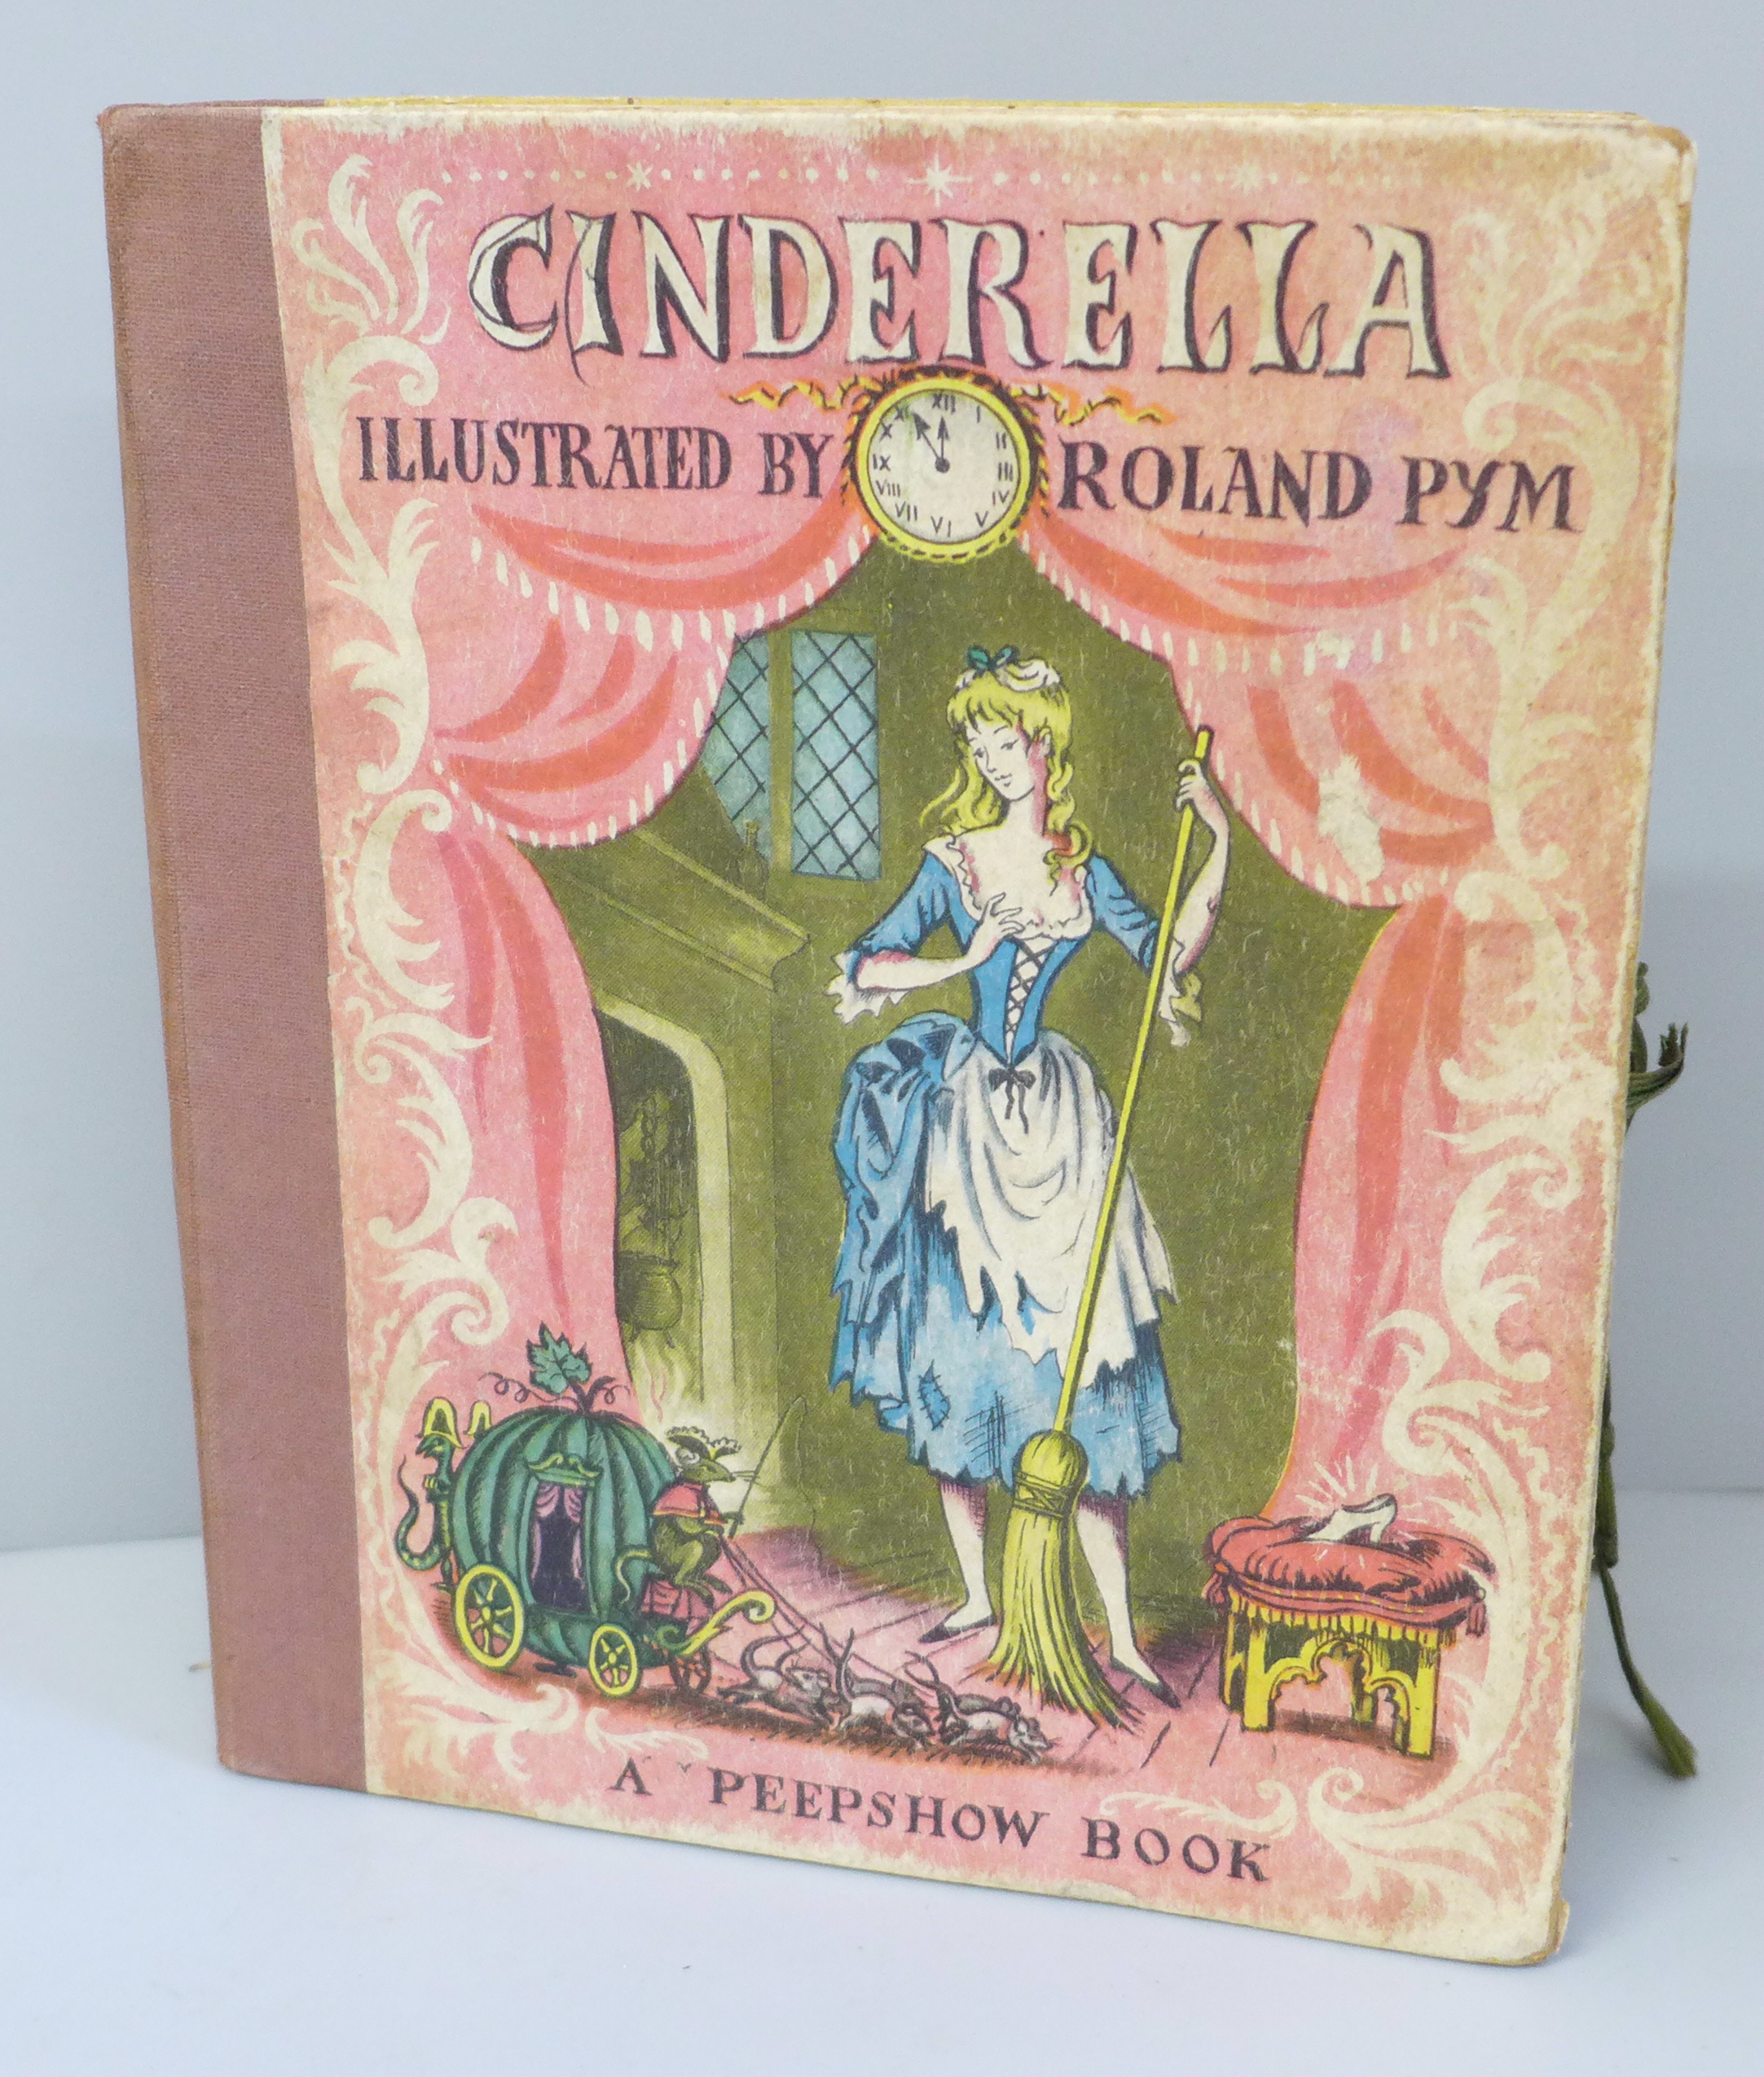 One volume, Cinderella, a Peepshow book, illustrated by Roland Pym